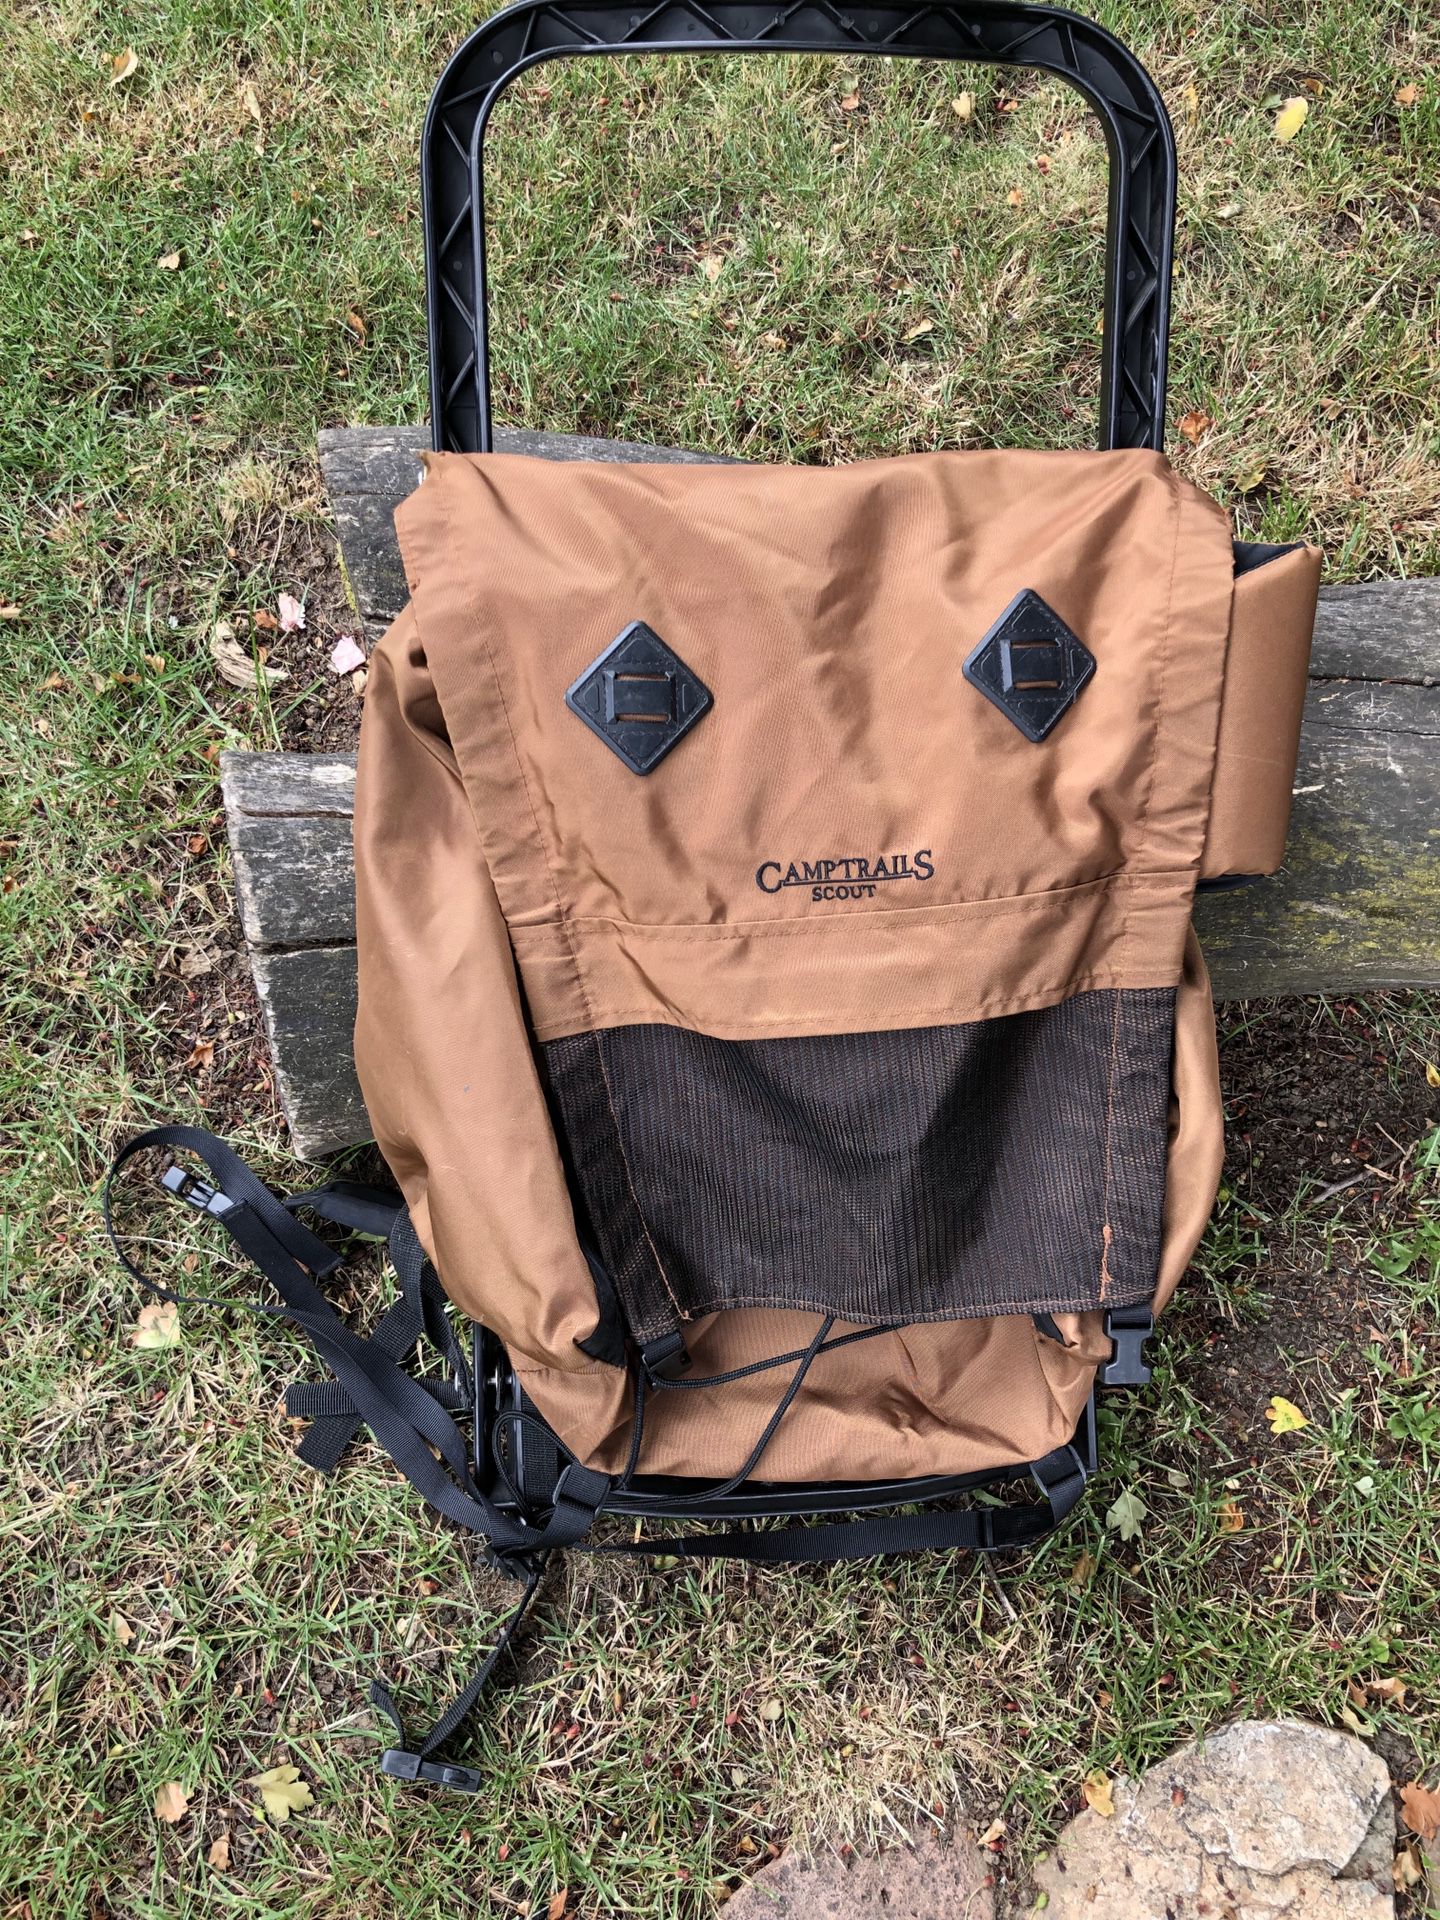 CampTrails Scout Hiking backpack with frame!